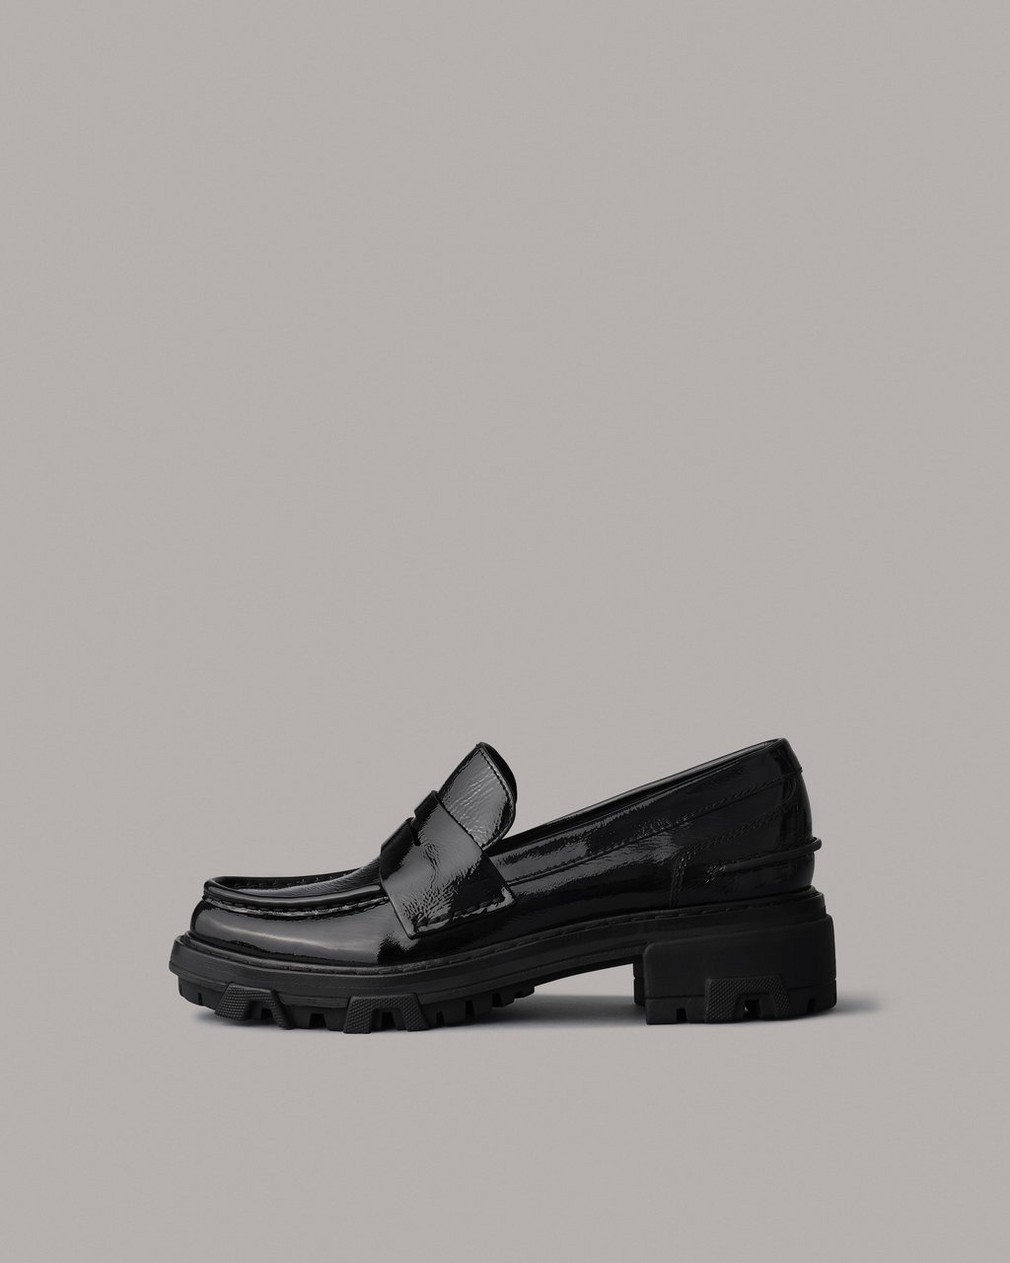 Shiloh Loafer - Patent Leather